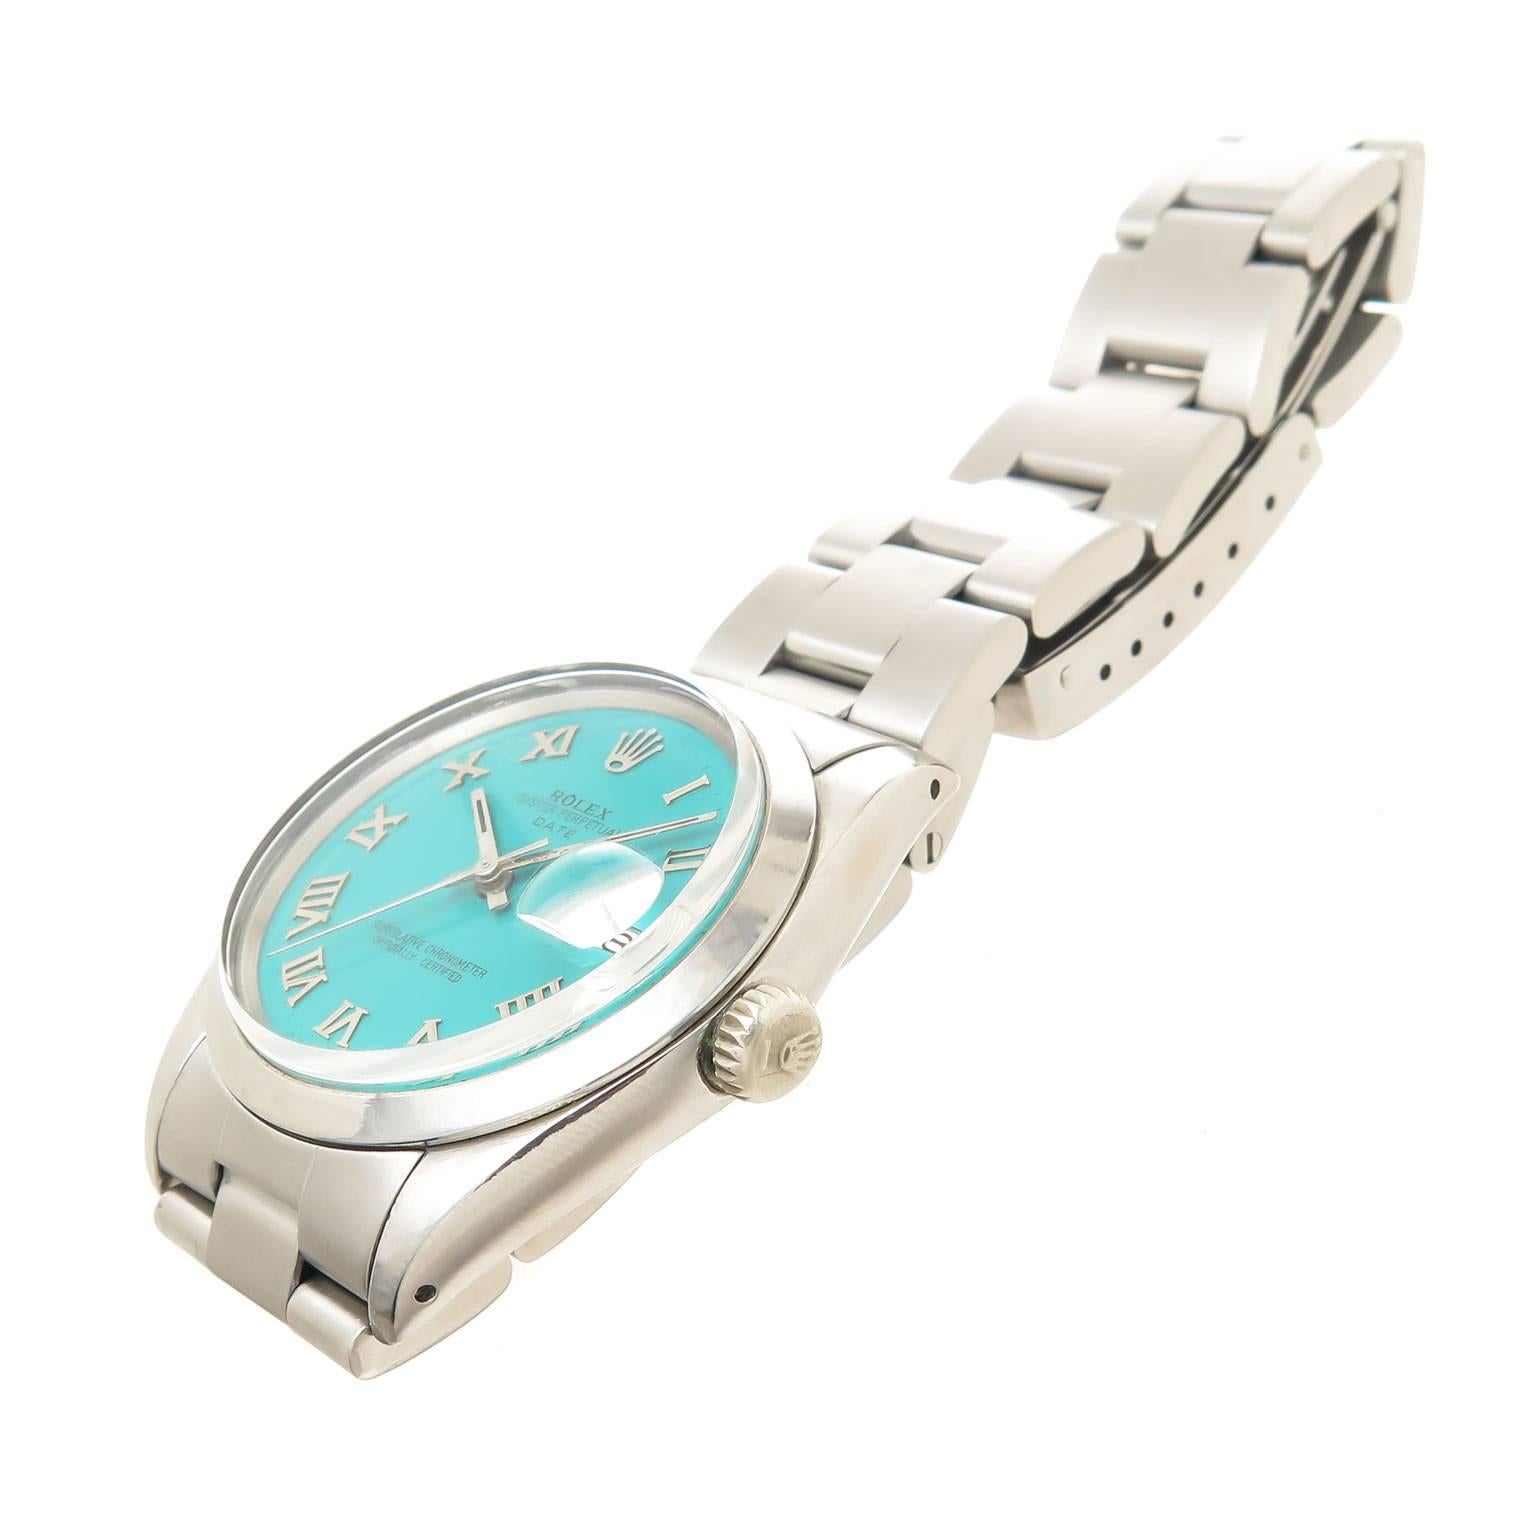 Circa 1965 Rolex Date Model, Reference 1500 Gents Wrist watch, 34 MM Stainless Steel Water proof Oyster case with Smooth Bezel. Caliber 1570 26 Jewel, automatic, self winding movement. Custom Turquoise Blue Dial with Raised Roman Numeral Markers,